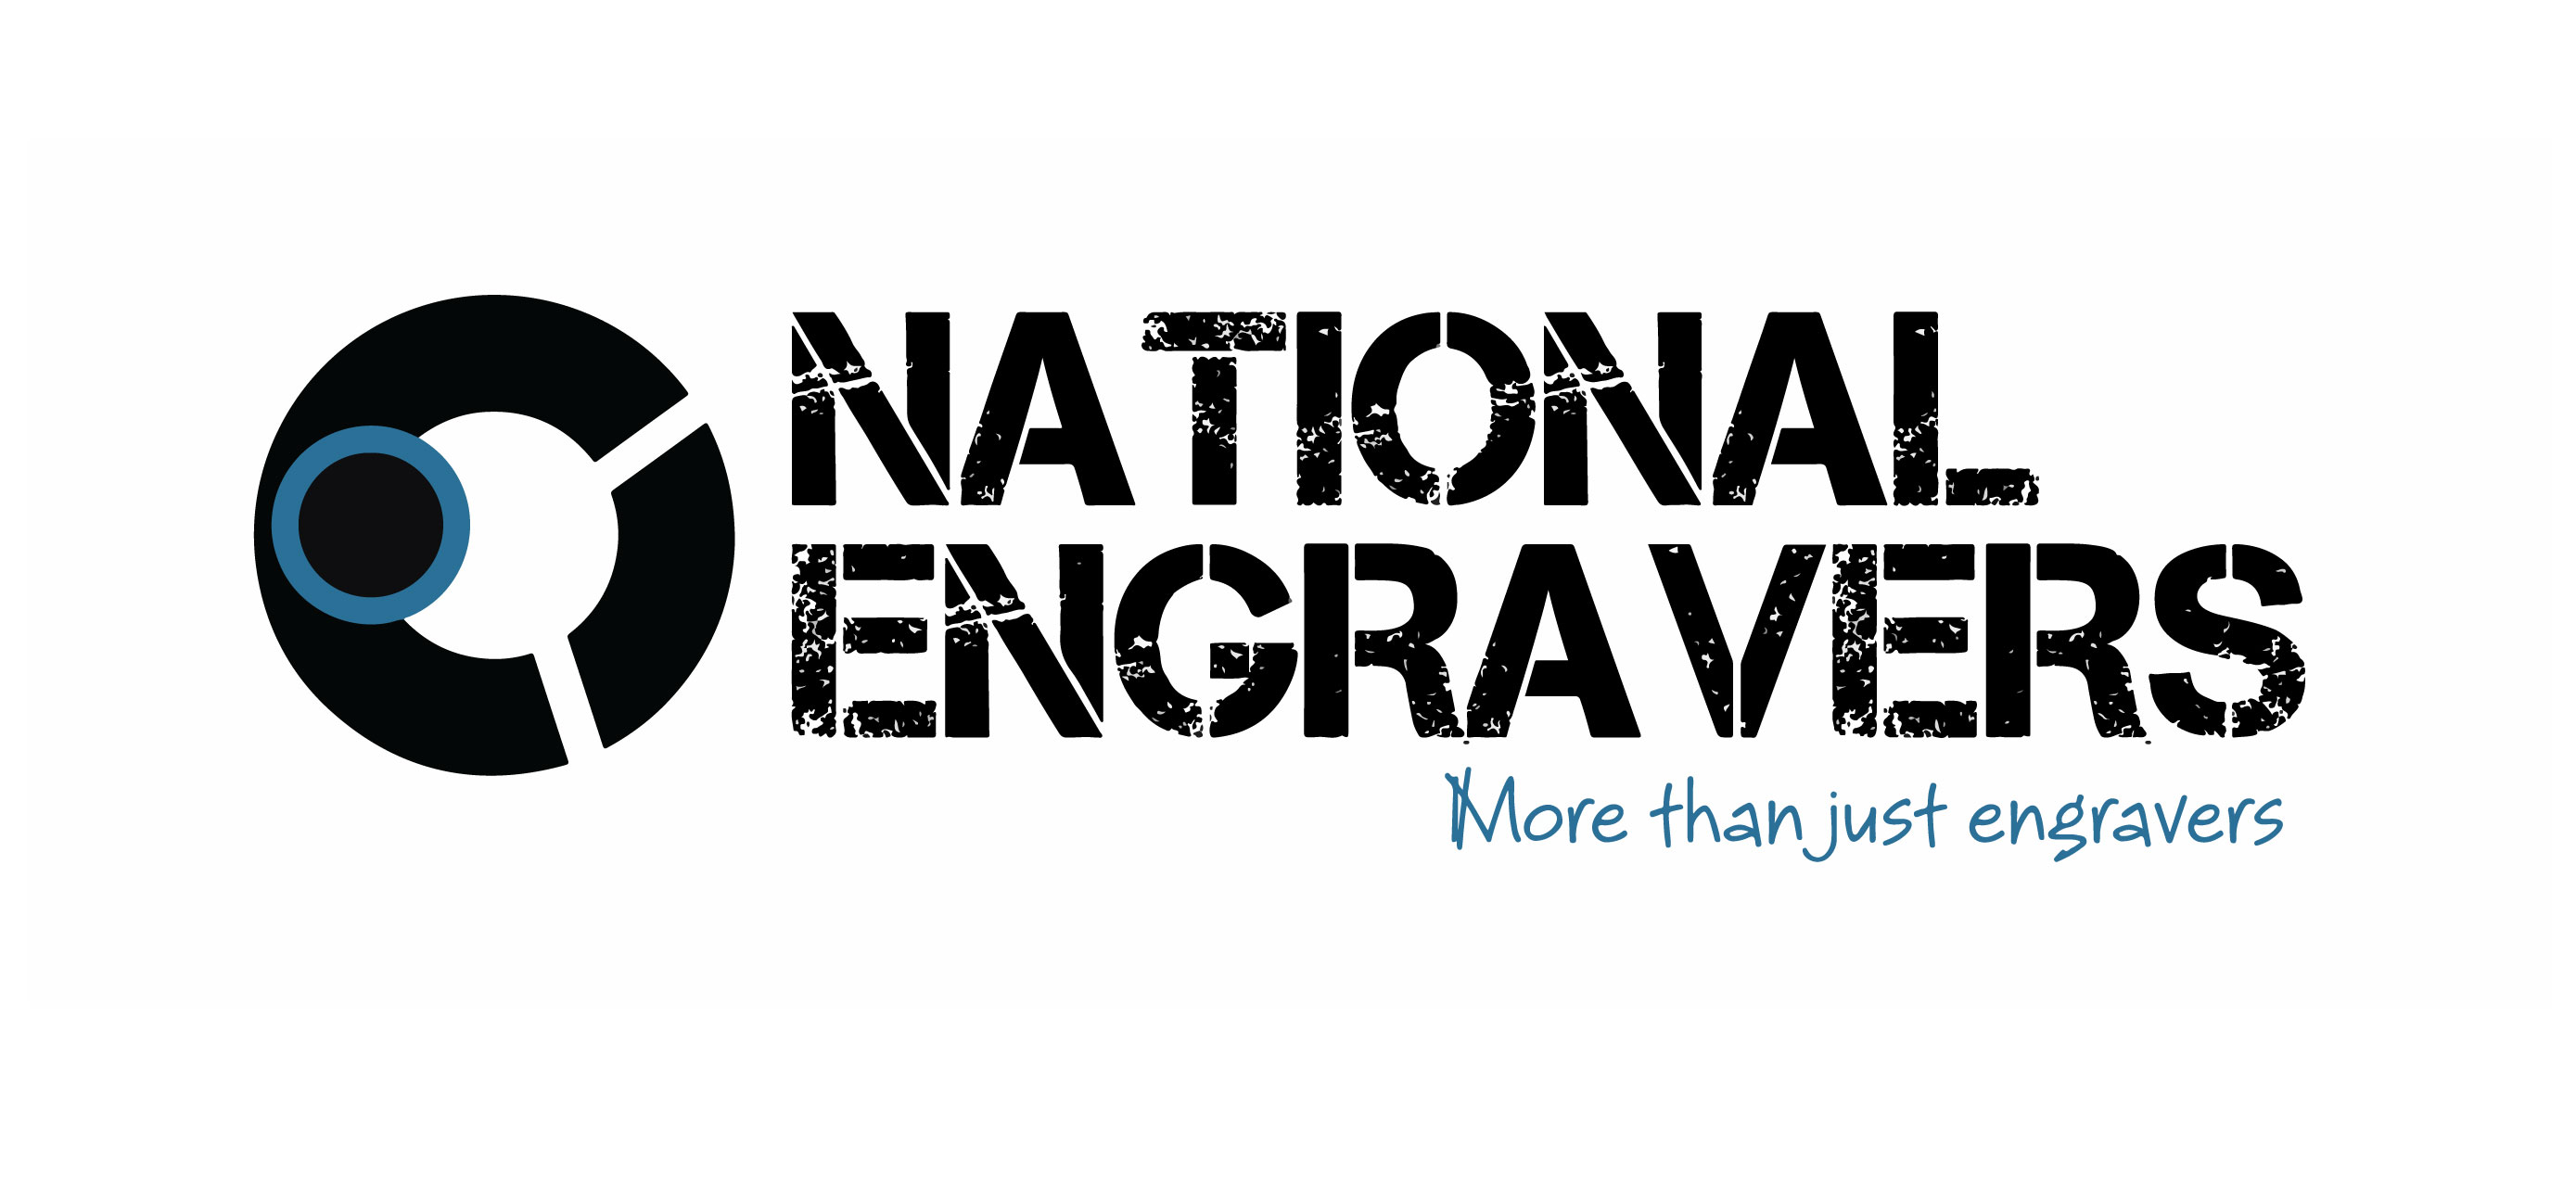 National Engravers